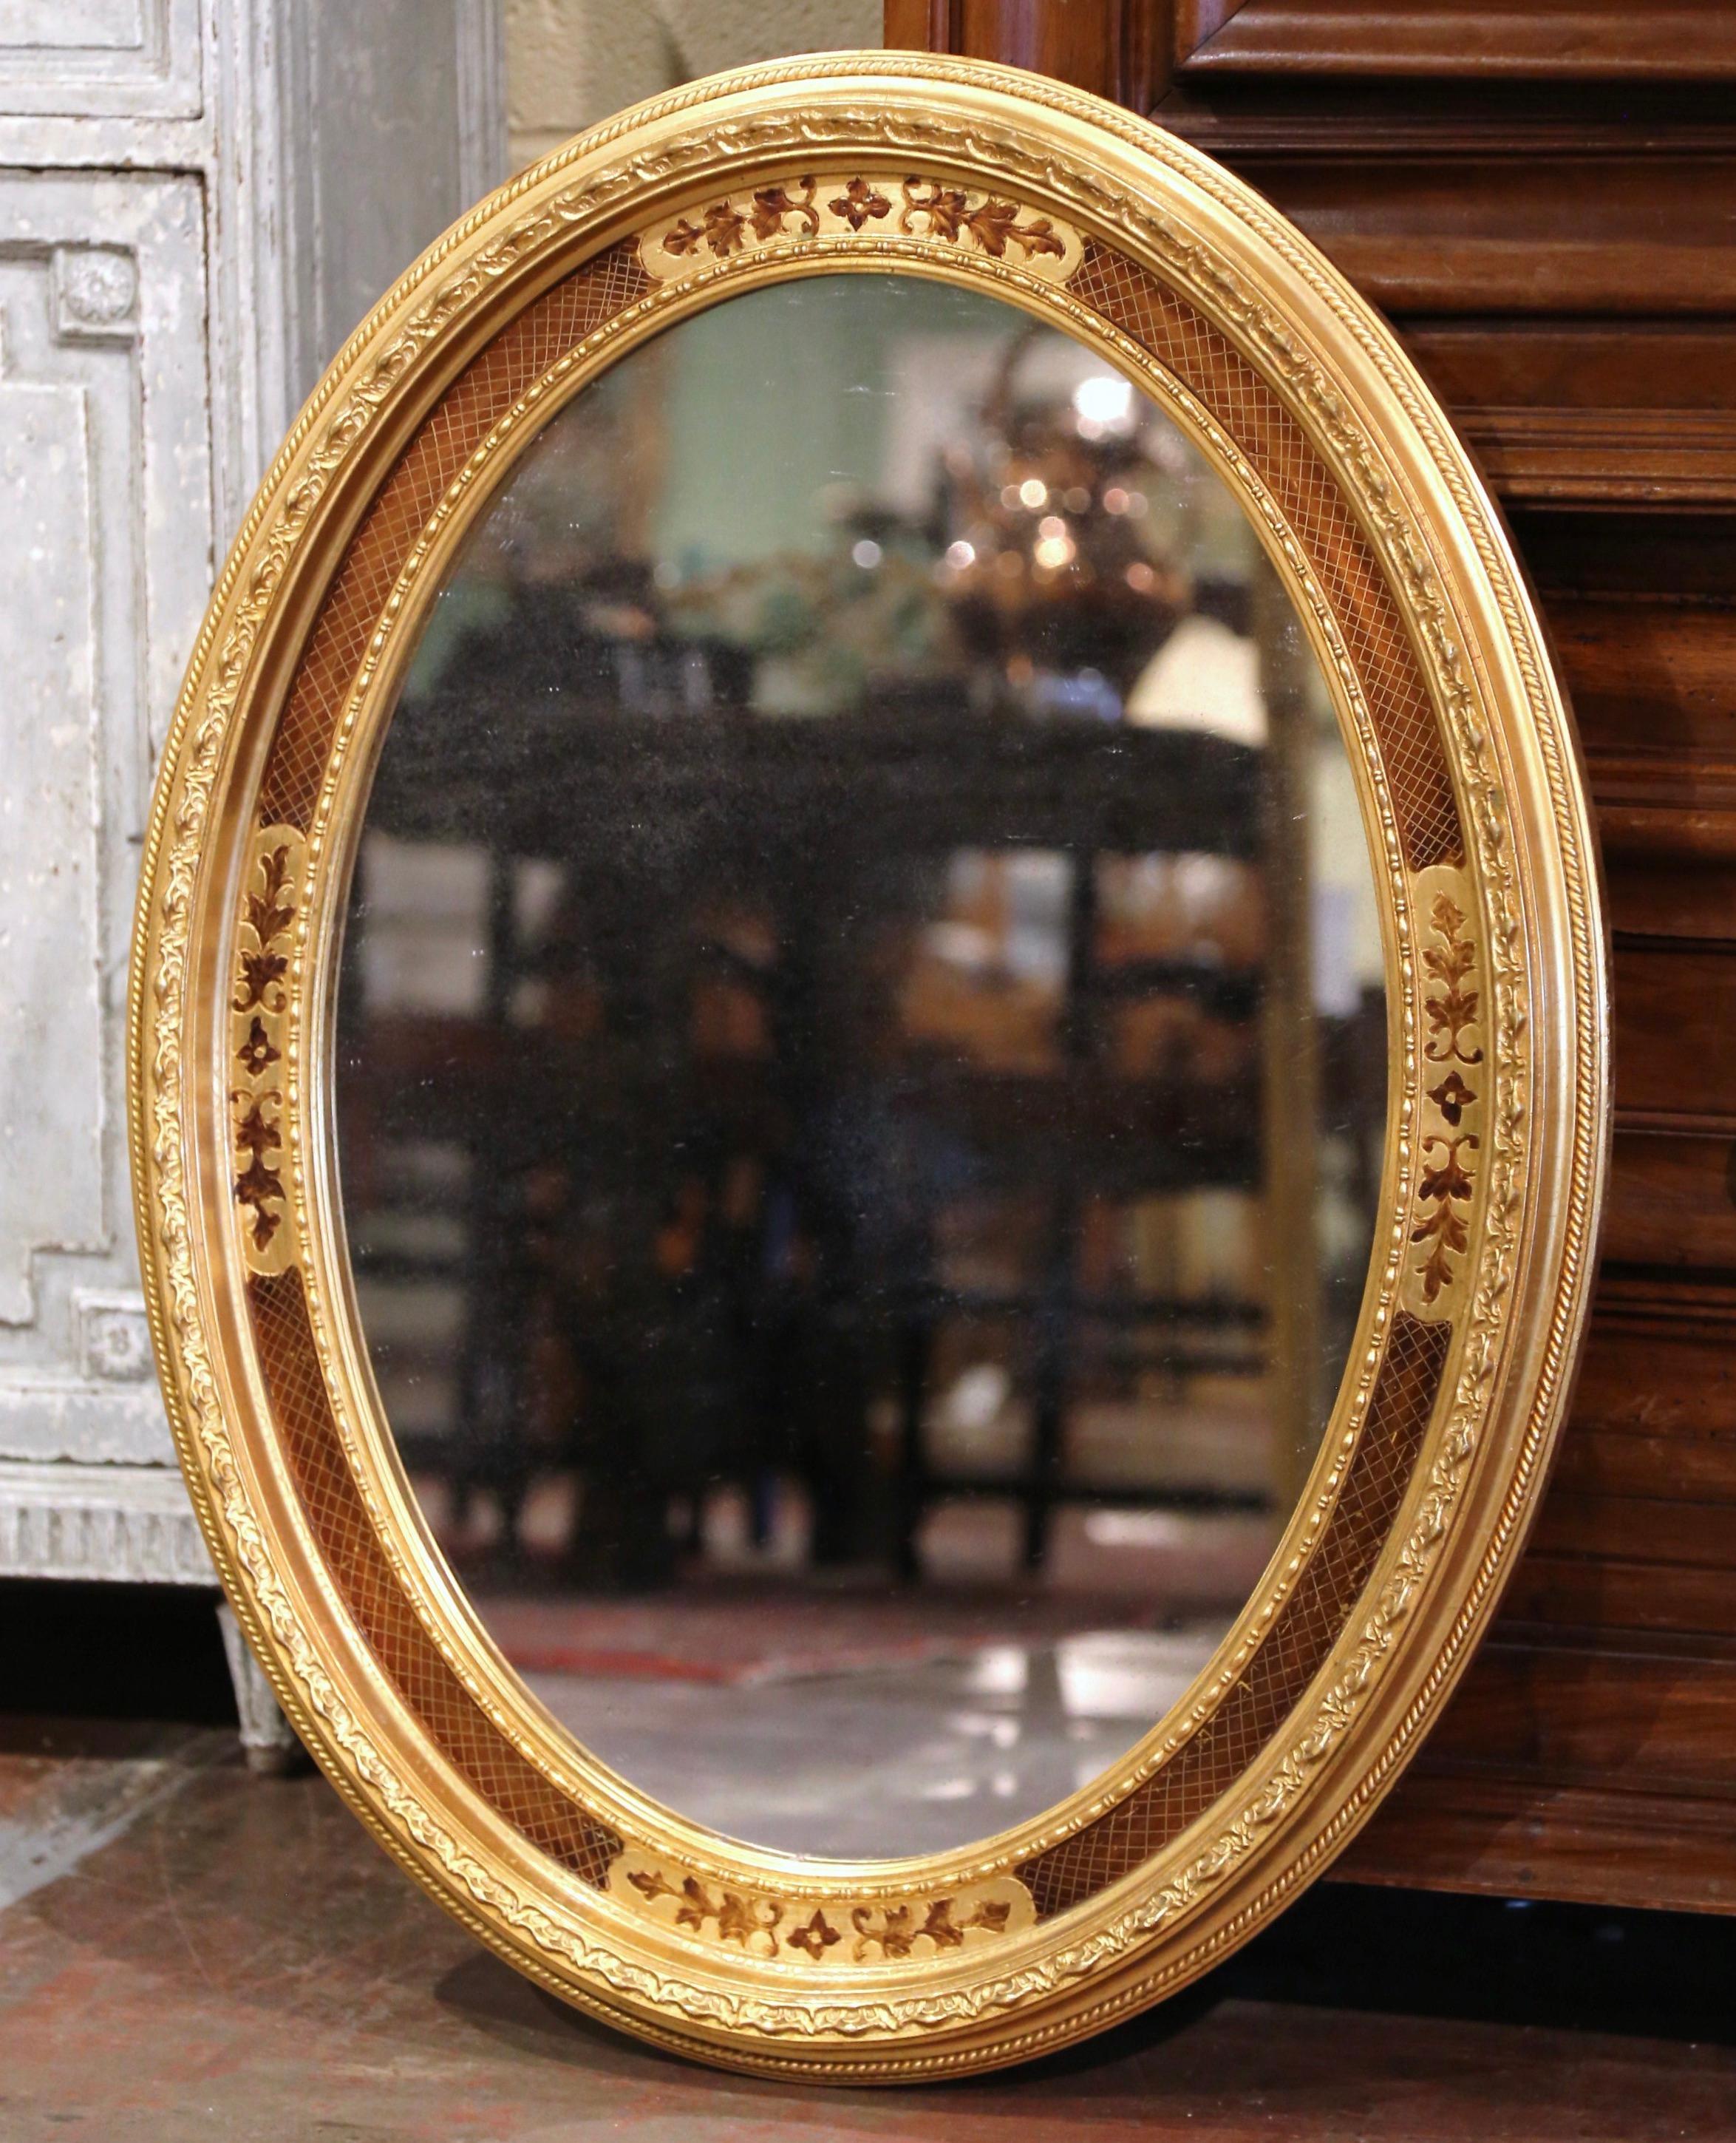 Decorate a powder room or entryway with this elegant antique wall mirror. Crafted in France, circa 1950, the oval frame is decorated with floral motifs and embellished with geometric motifs around the frame including bead decor. The Napoleon III